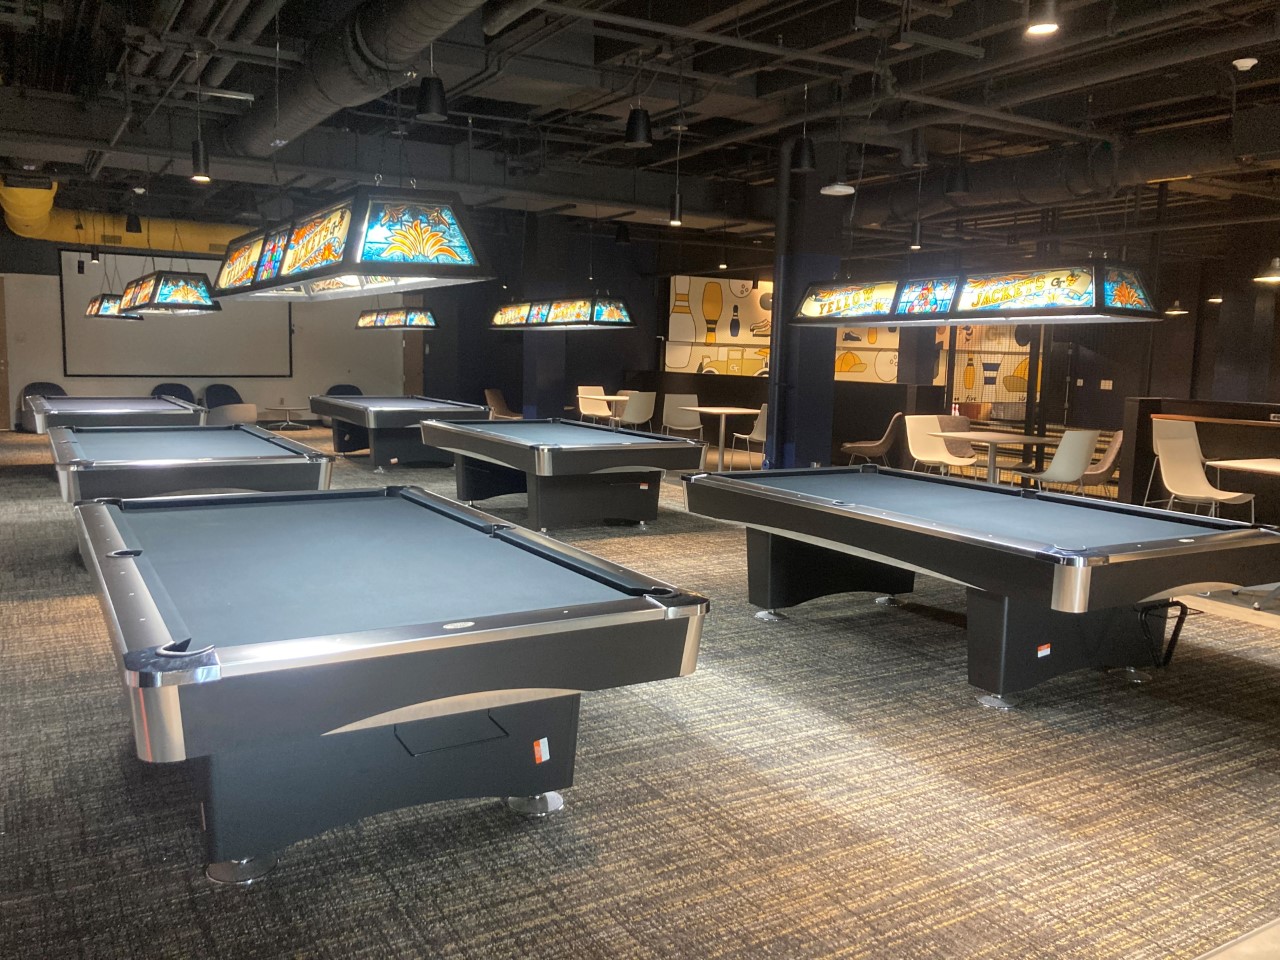 View of Pool Tables